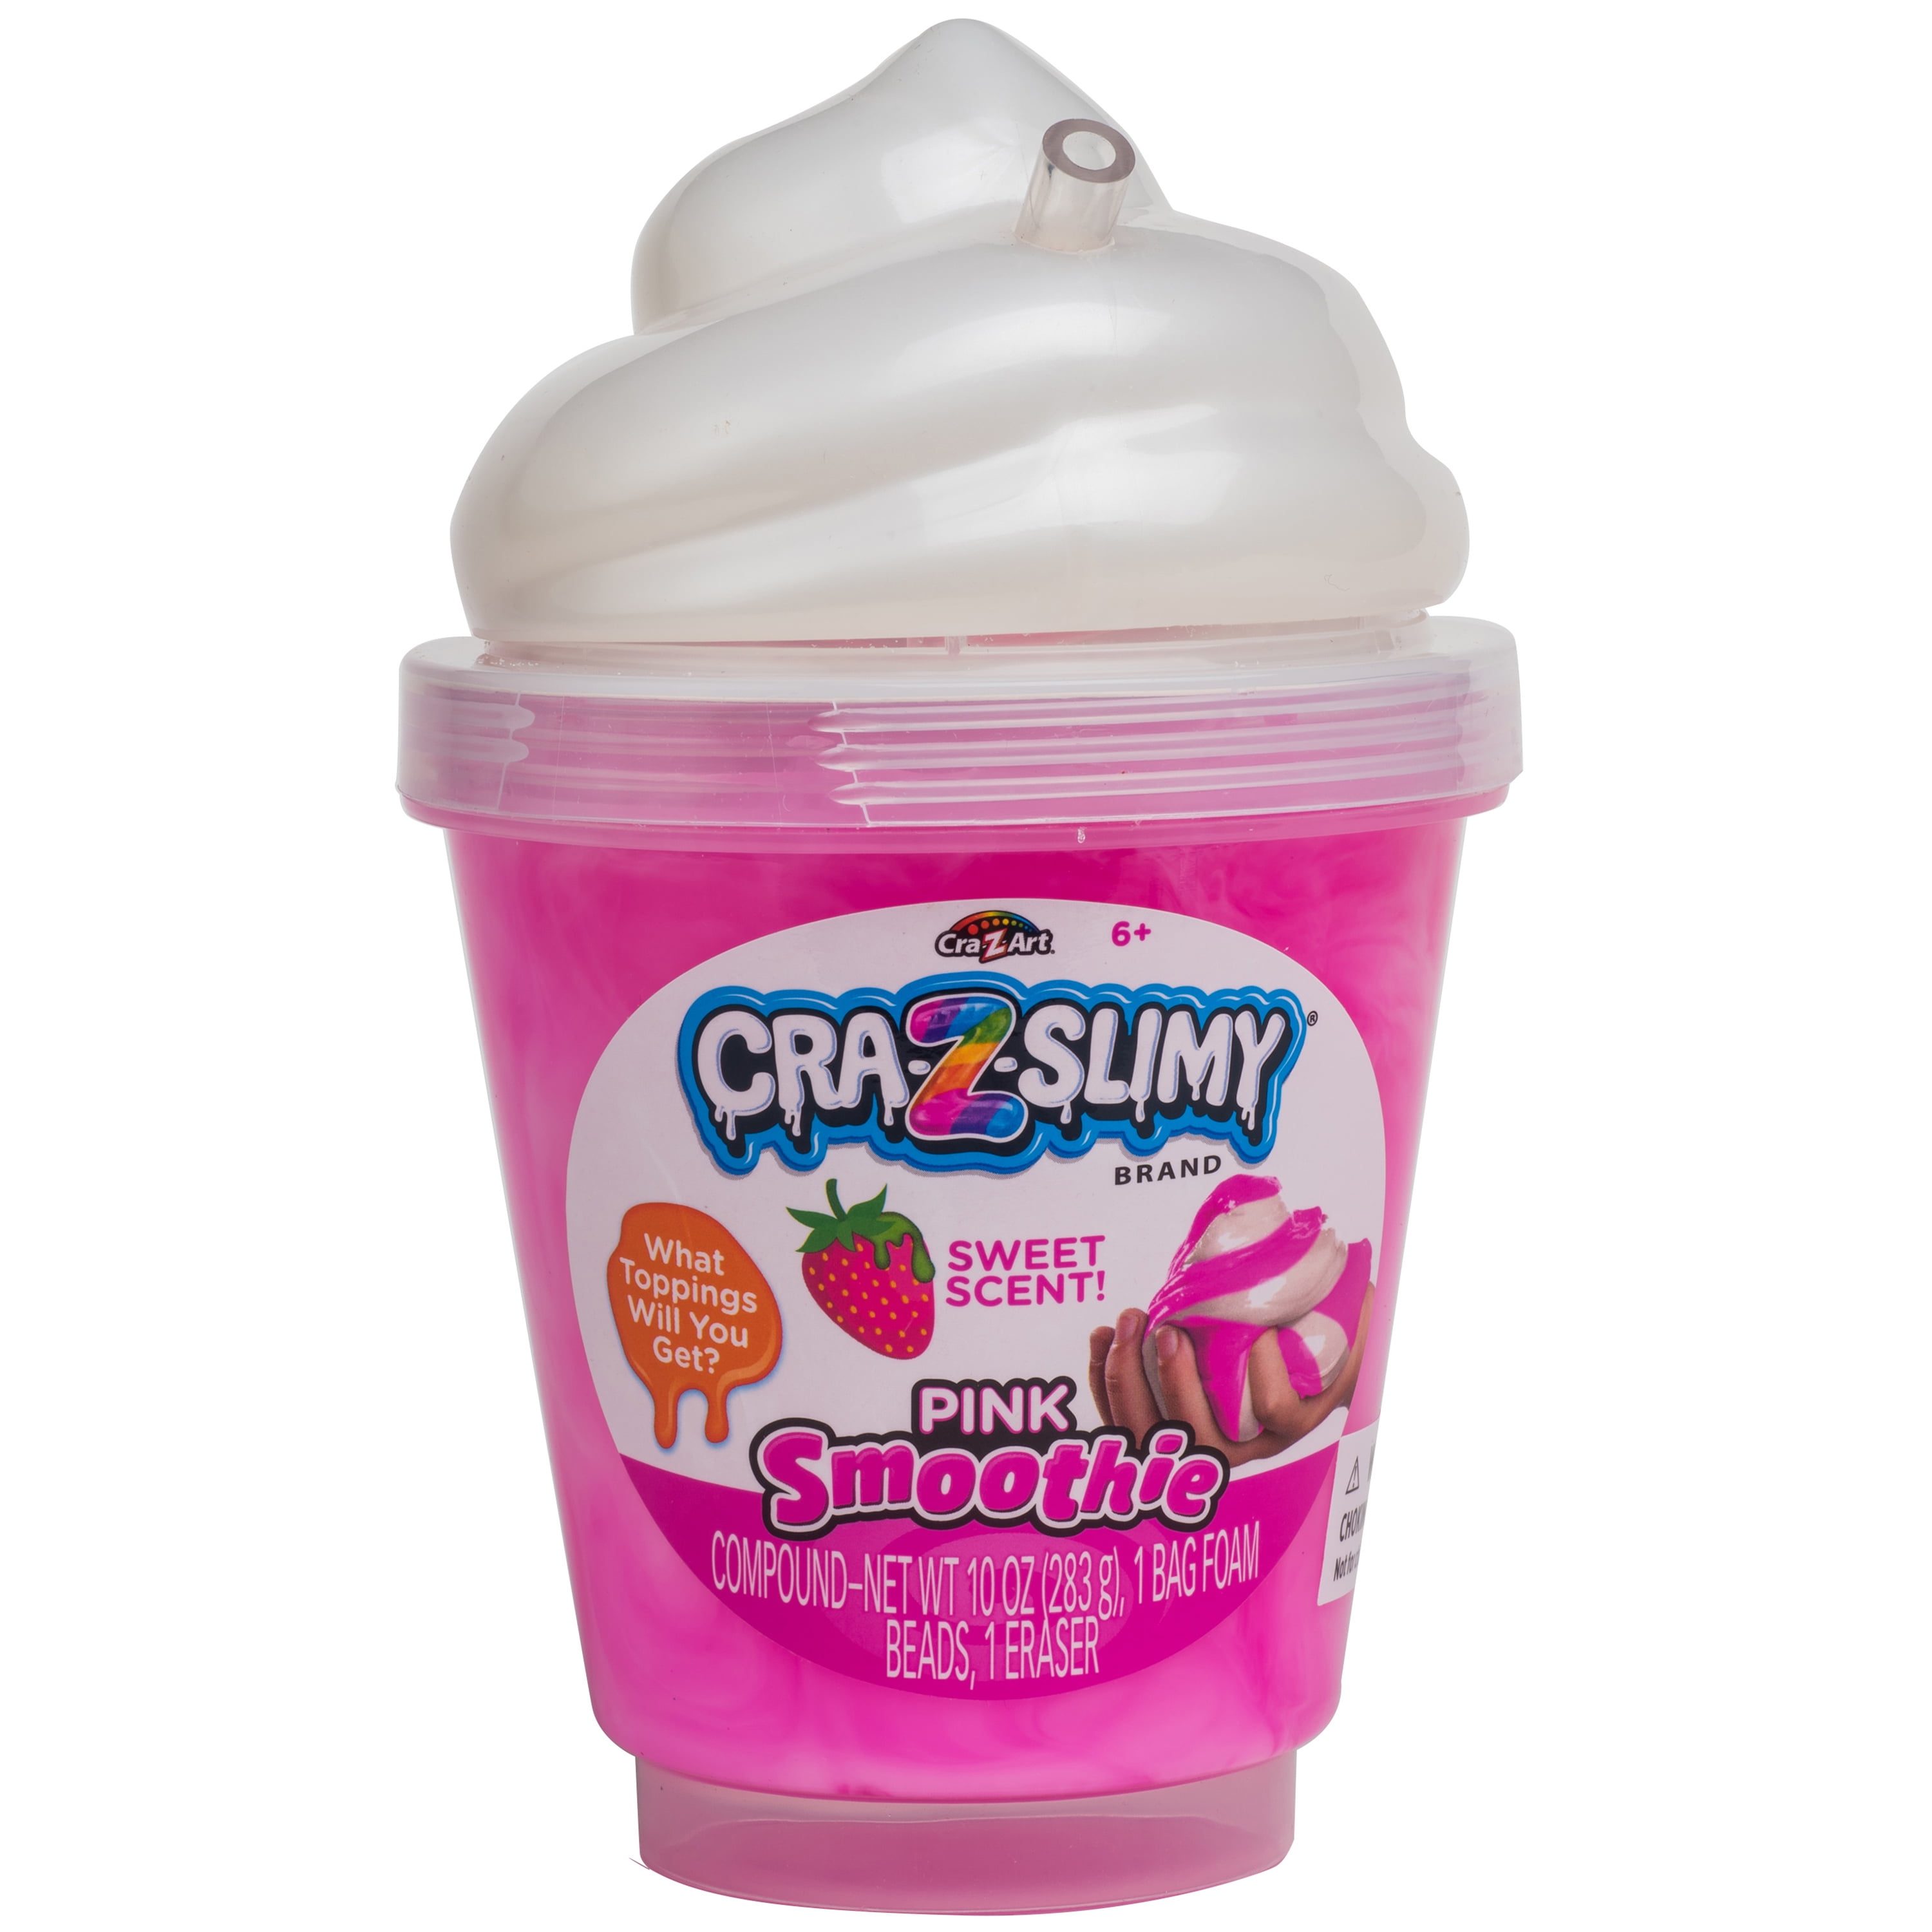 Cra-Z-Art Cra-Z-Slimy Strawberry Pink Smoothie Swirl Slime Jar, Ages 6 and up